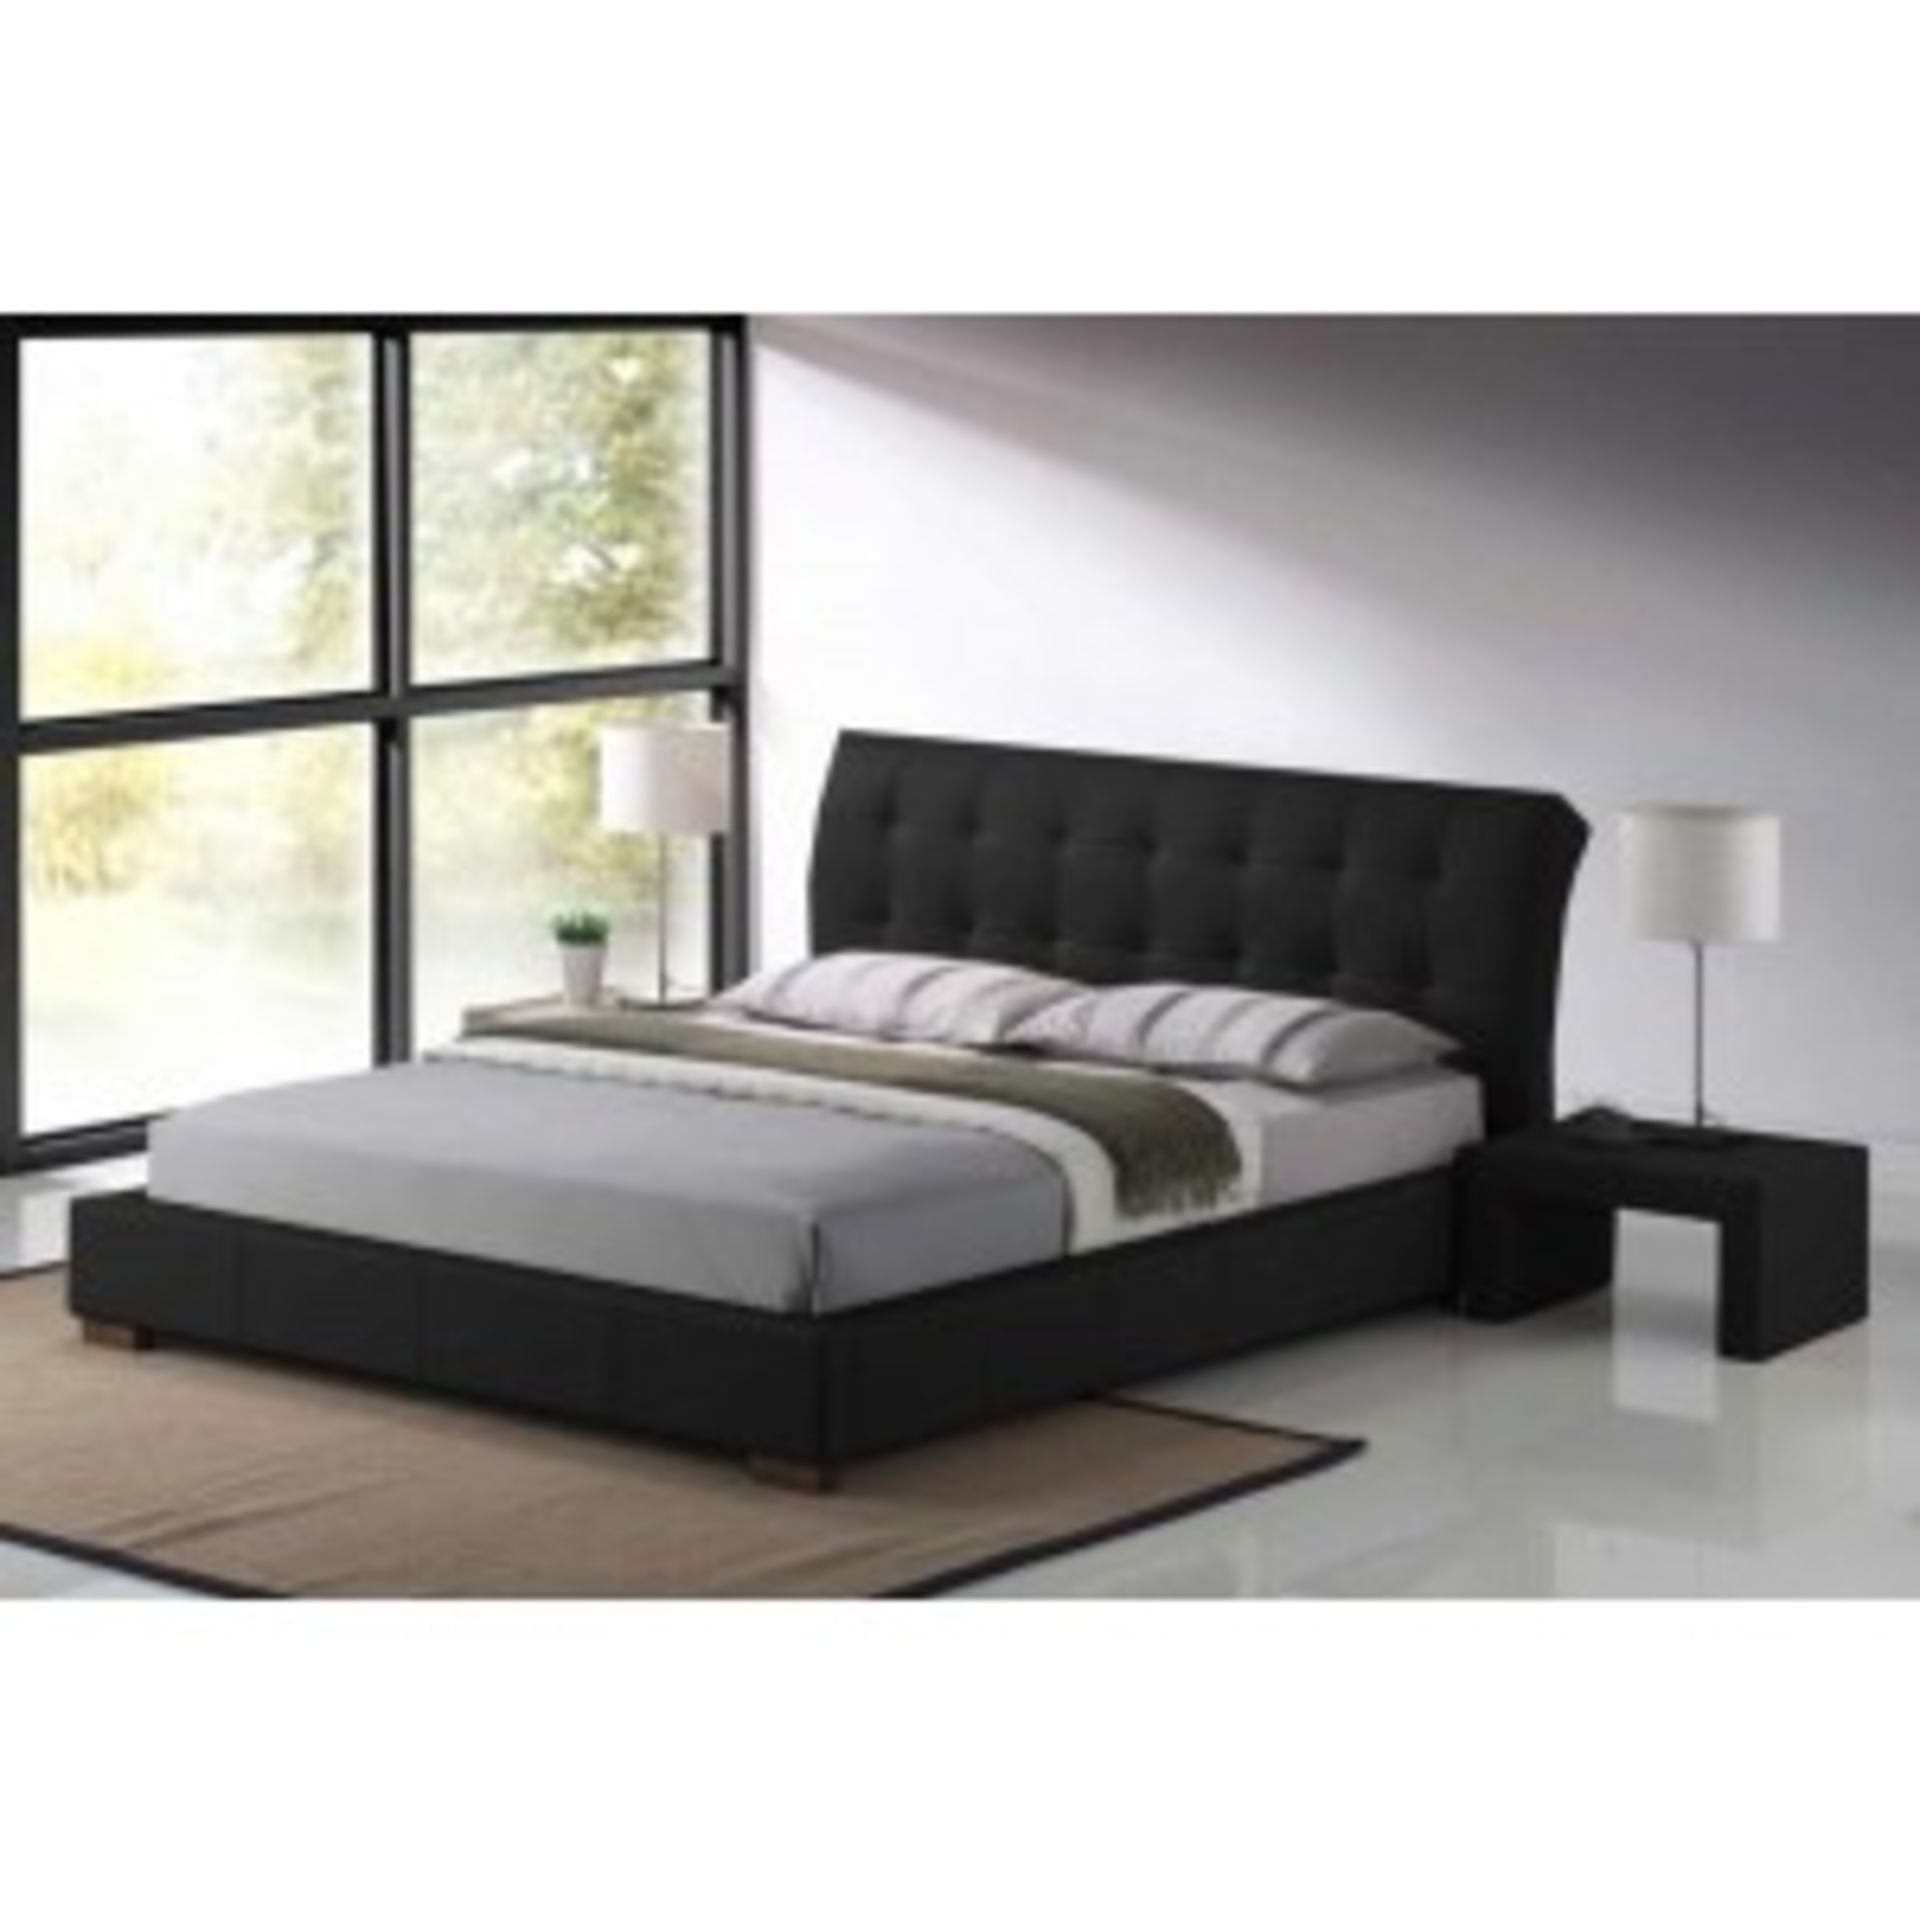 Brand new boxed direct from the manufacturers kingsize Sonoma up bedstead in black